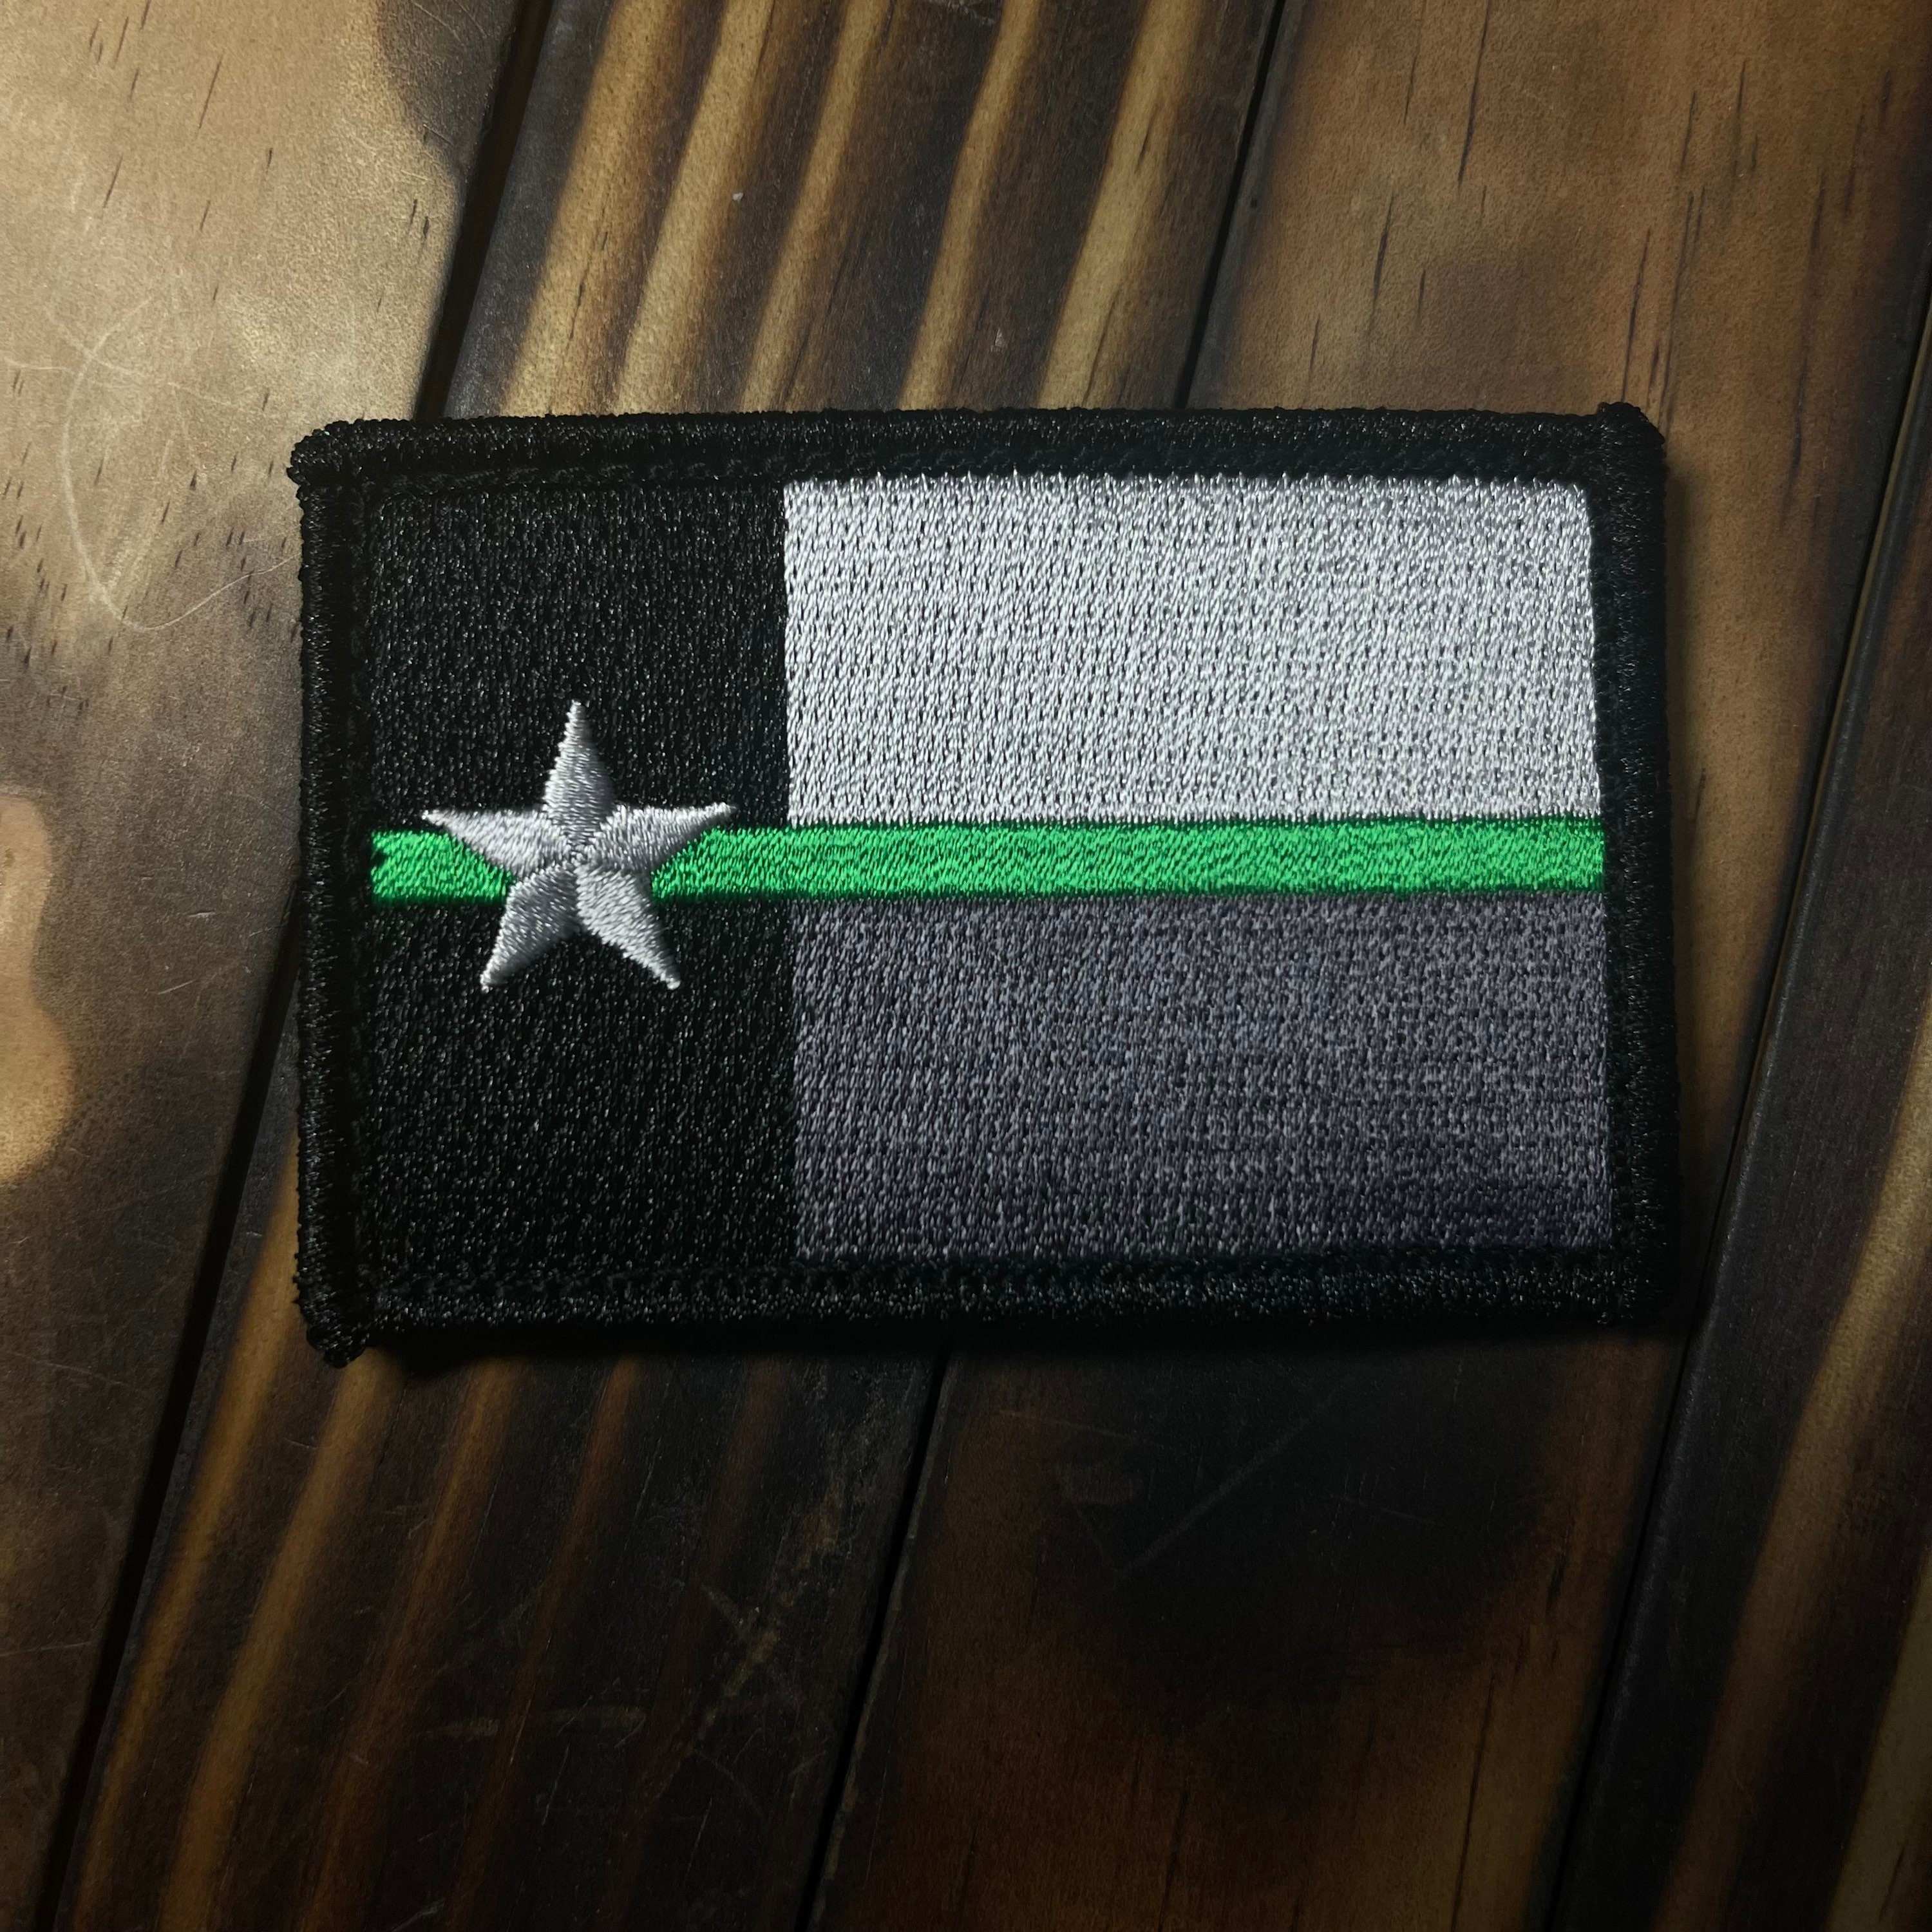 Subdued Thin Green Line Maryland State Flag Patch